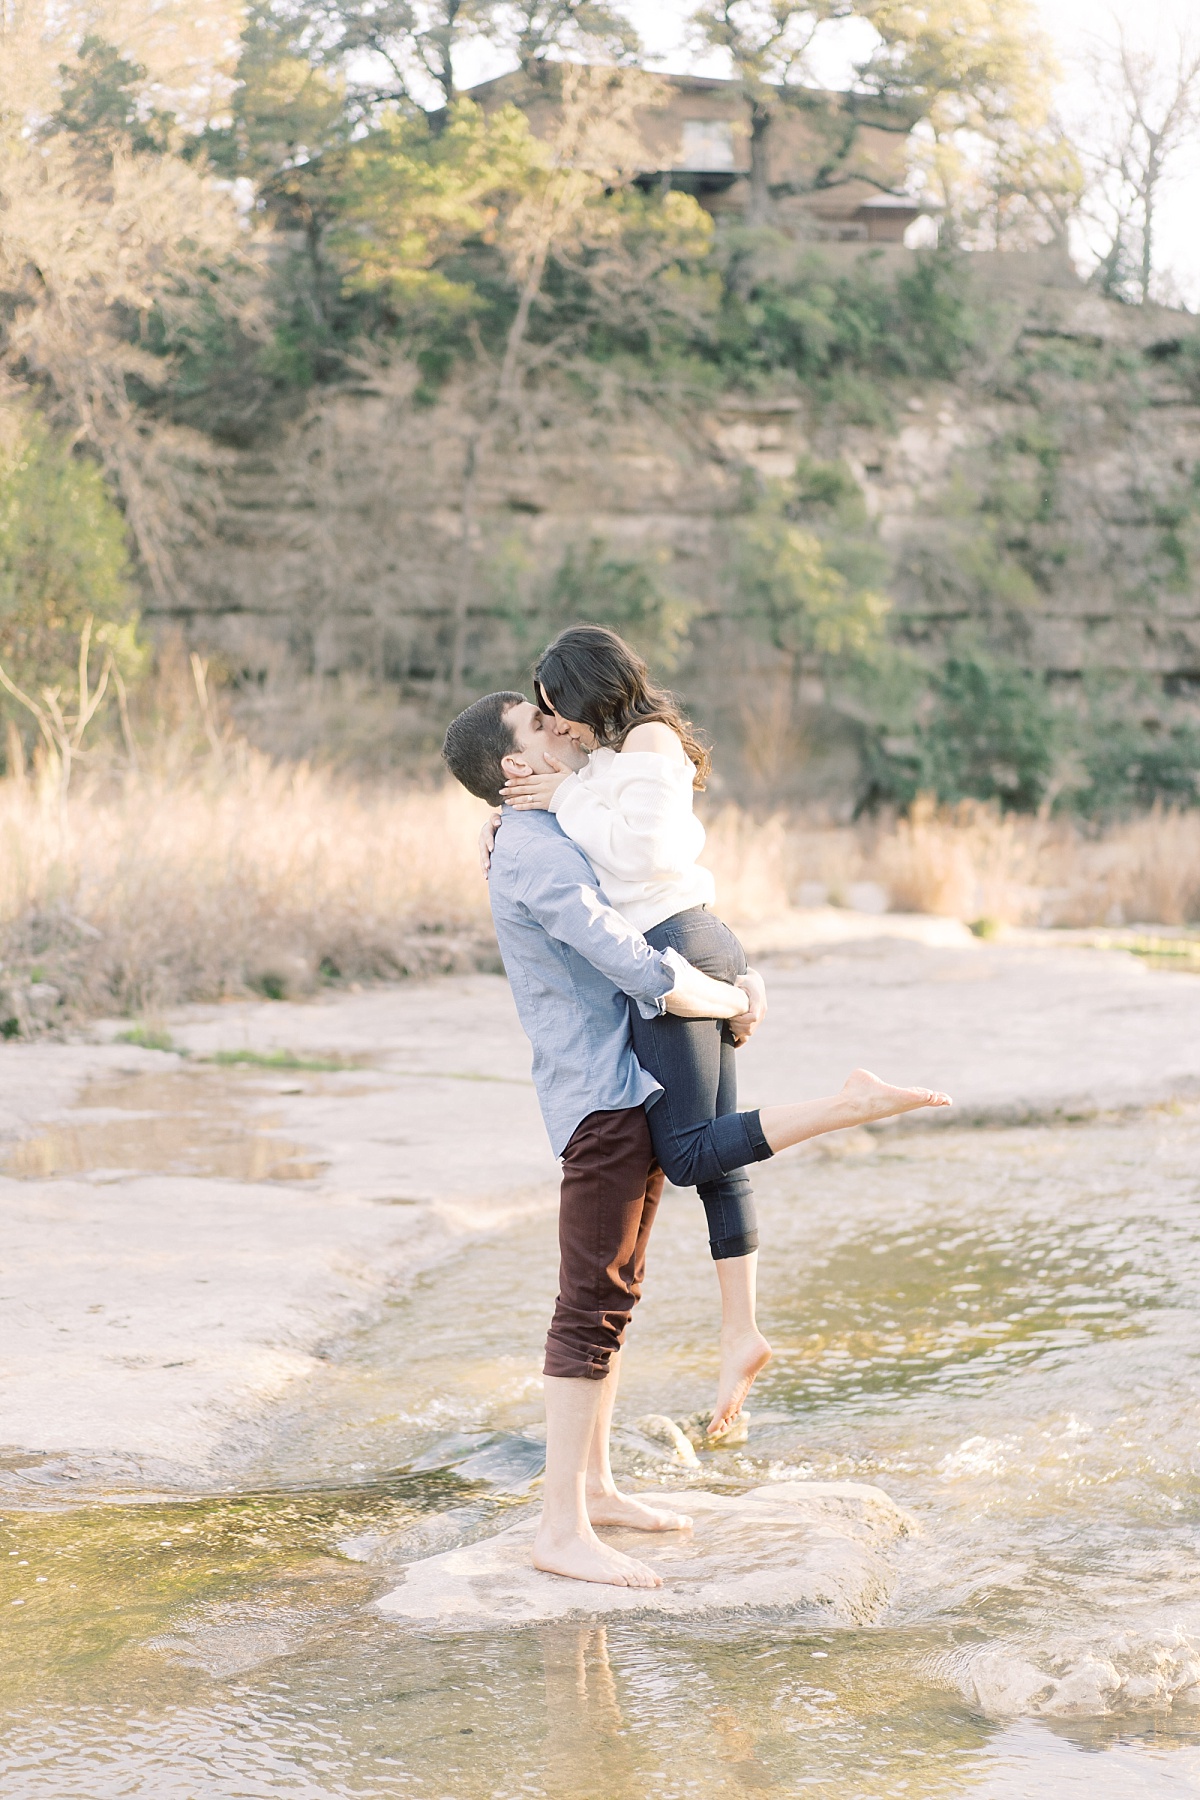 A tall man lifts and kisses his fiance while standing barefoot in the Colorado River at golden hour.